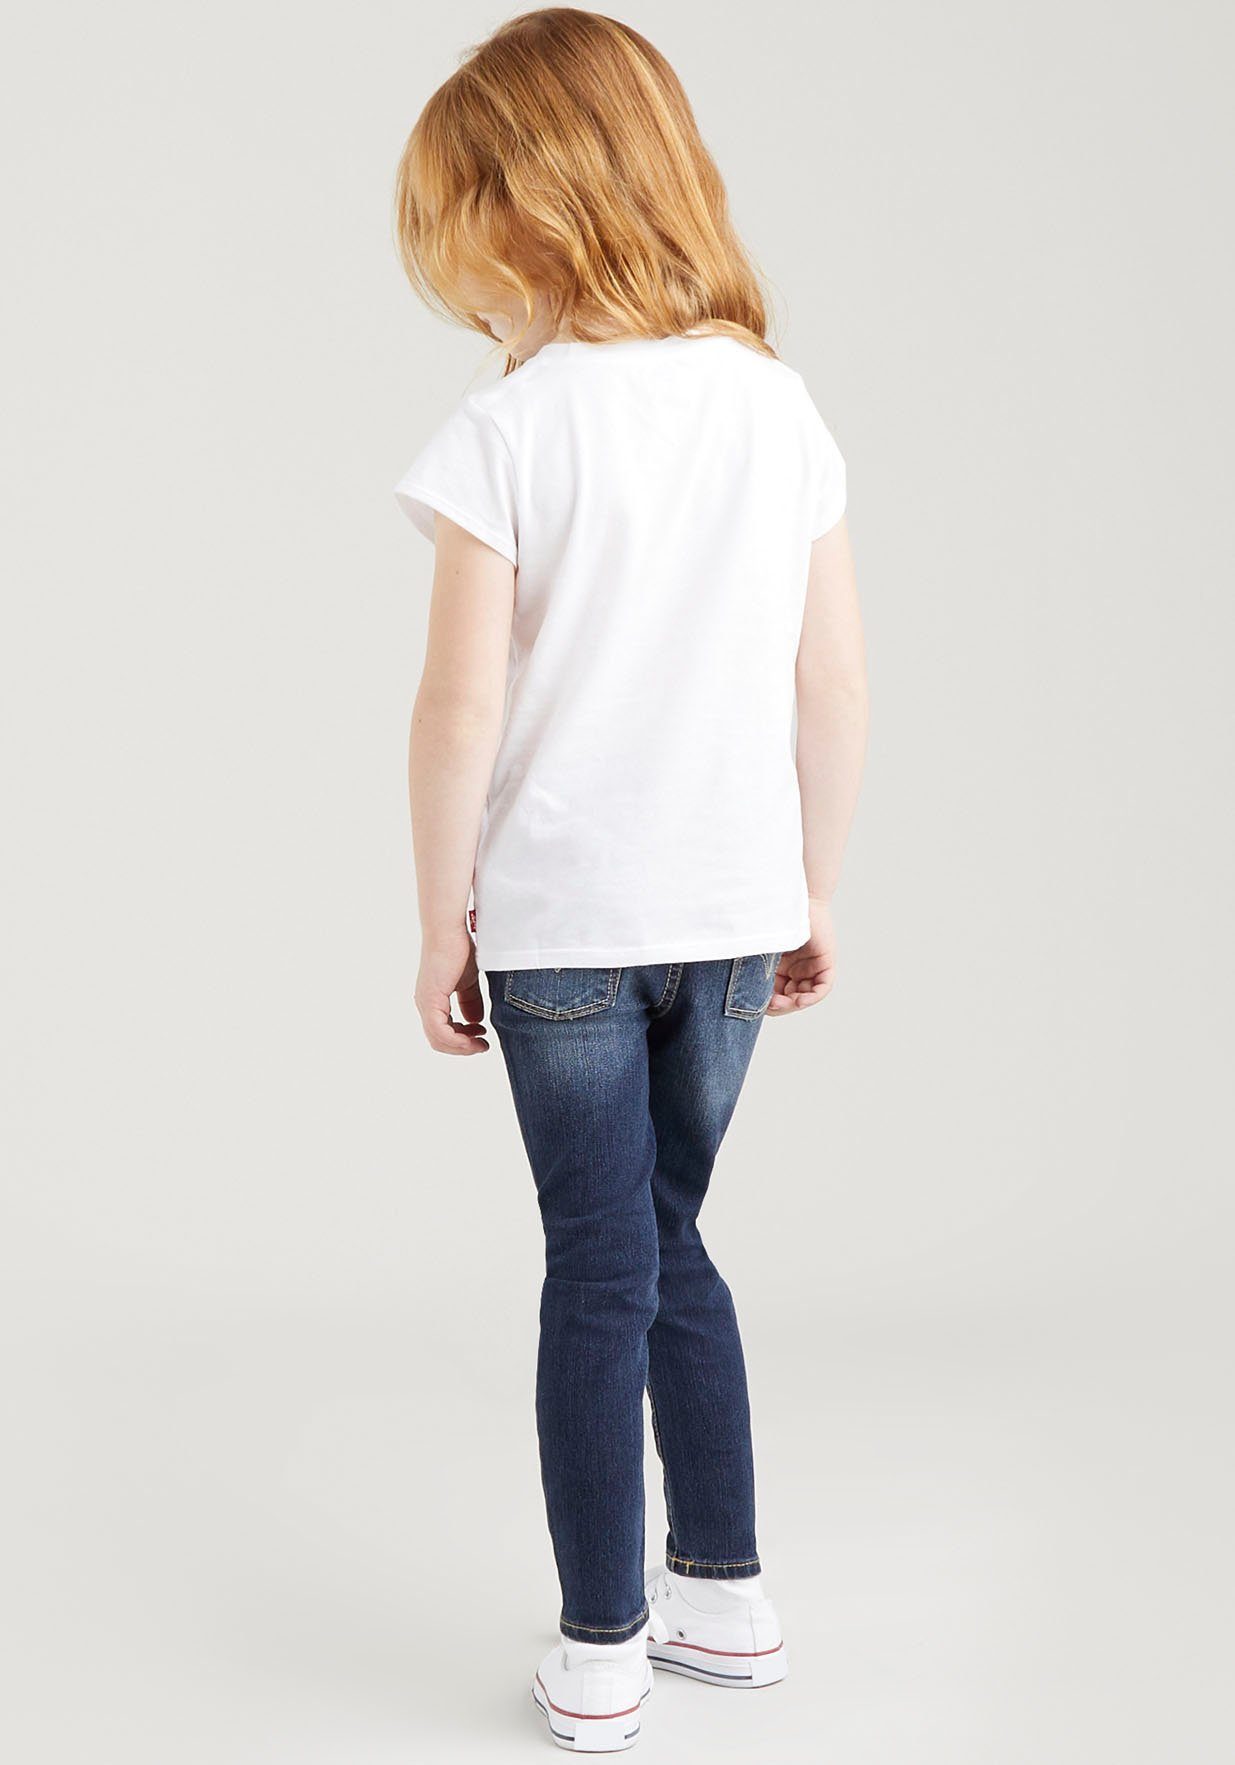 T-Shirt GIRLS Kids Levi's® TEE S/S weiß for BATWING